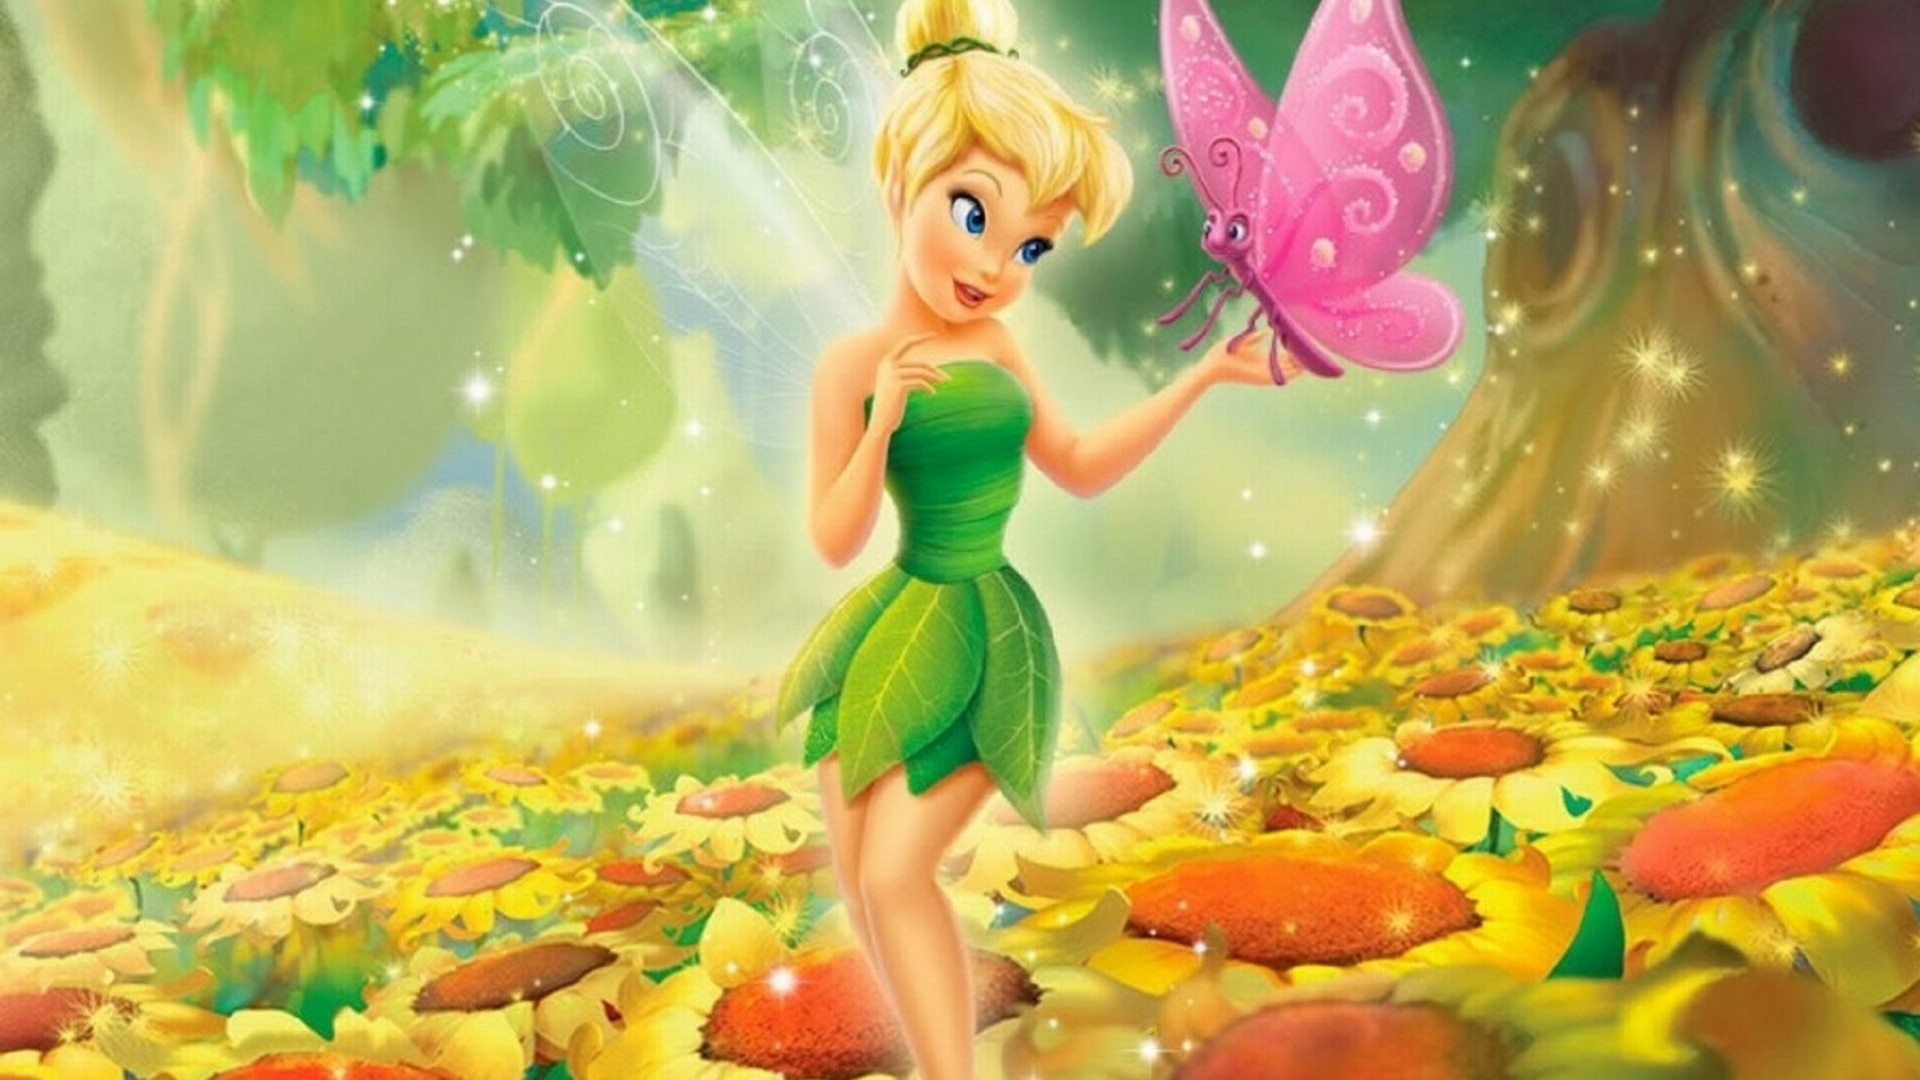 Tinkerbell Wallpaper For Desktop, Laptop, PC and Mobile